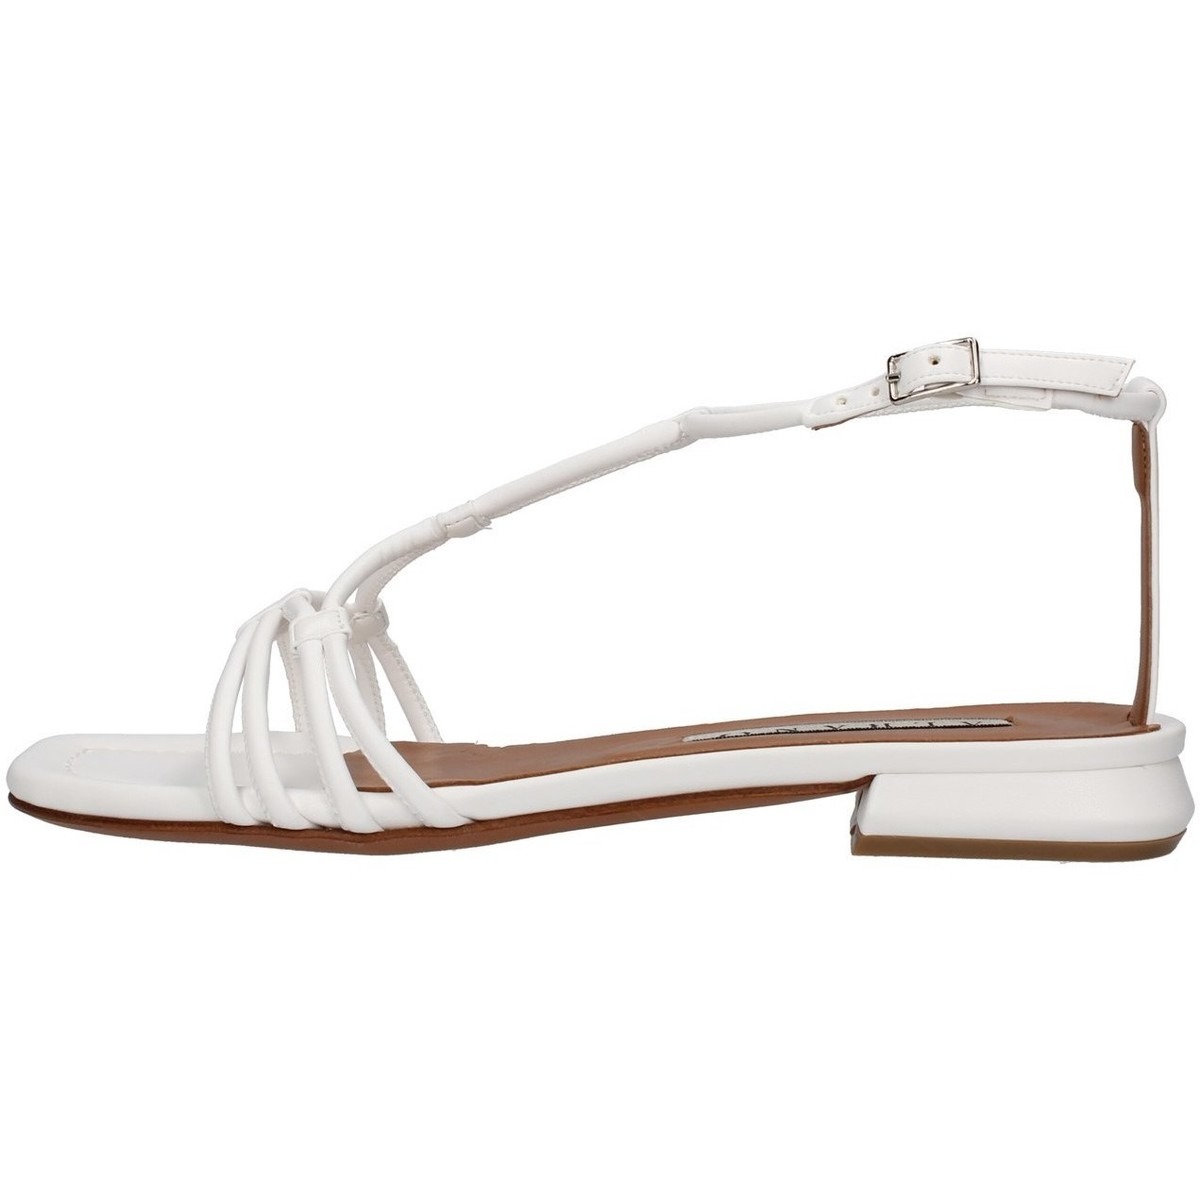 Albano - Sandals in White for Woman at Spartoo GOOFASH